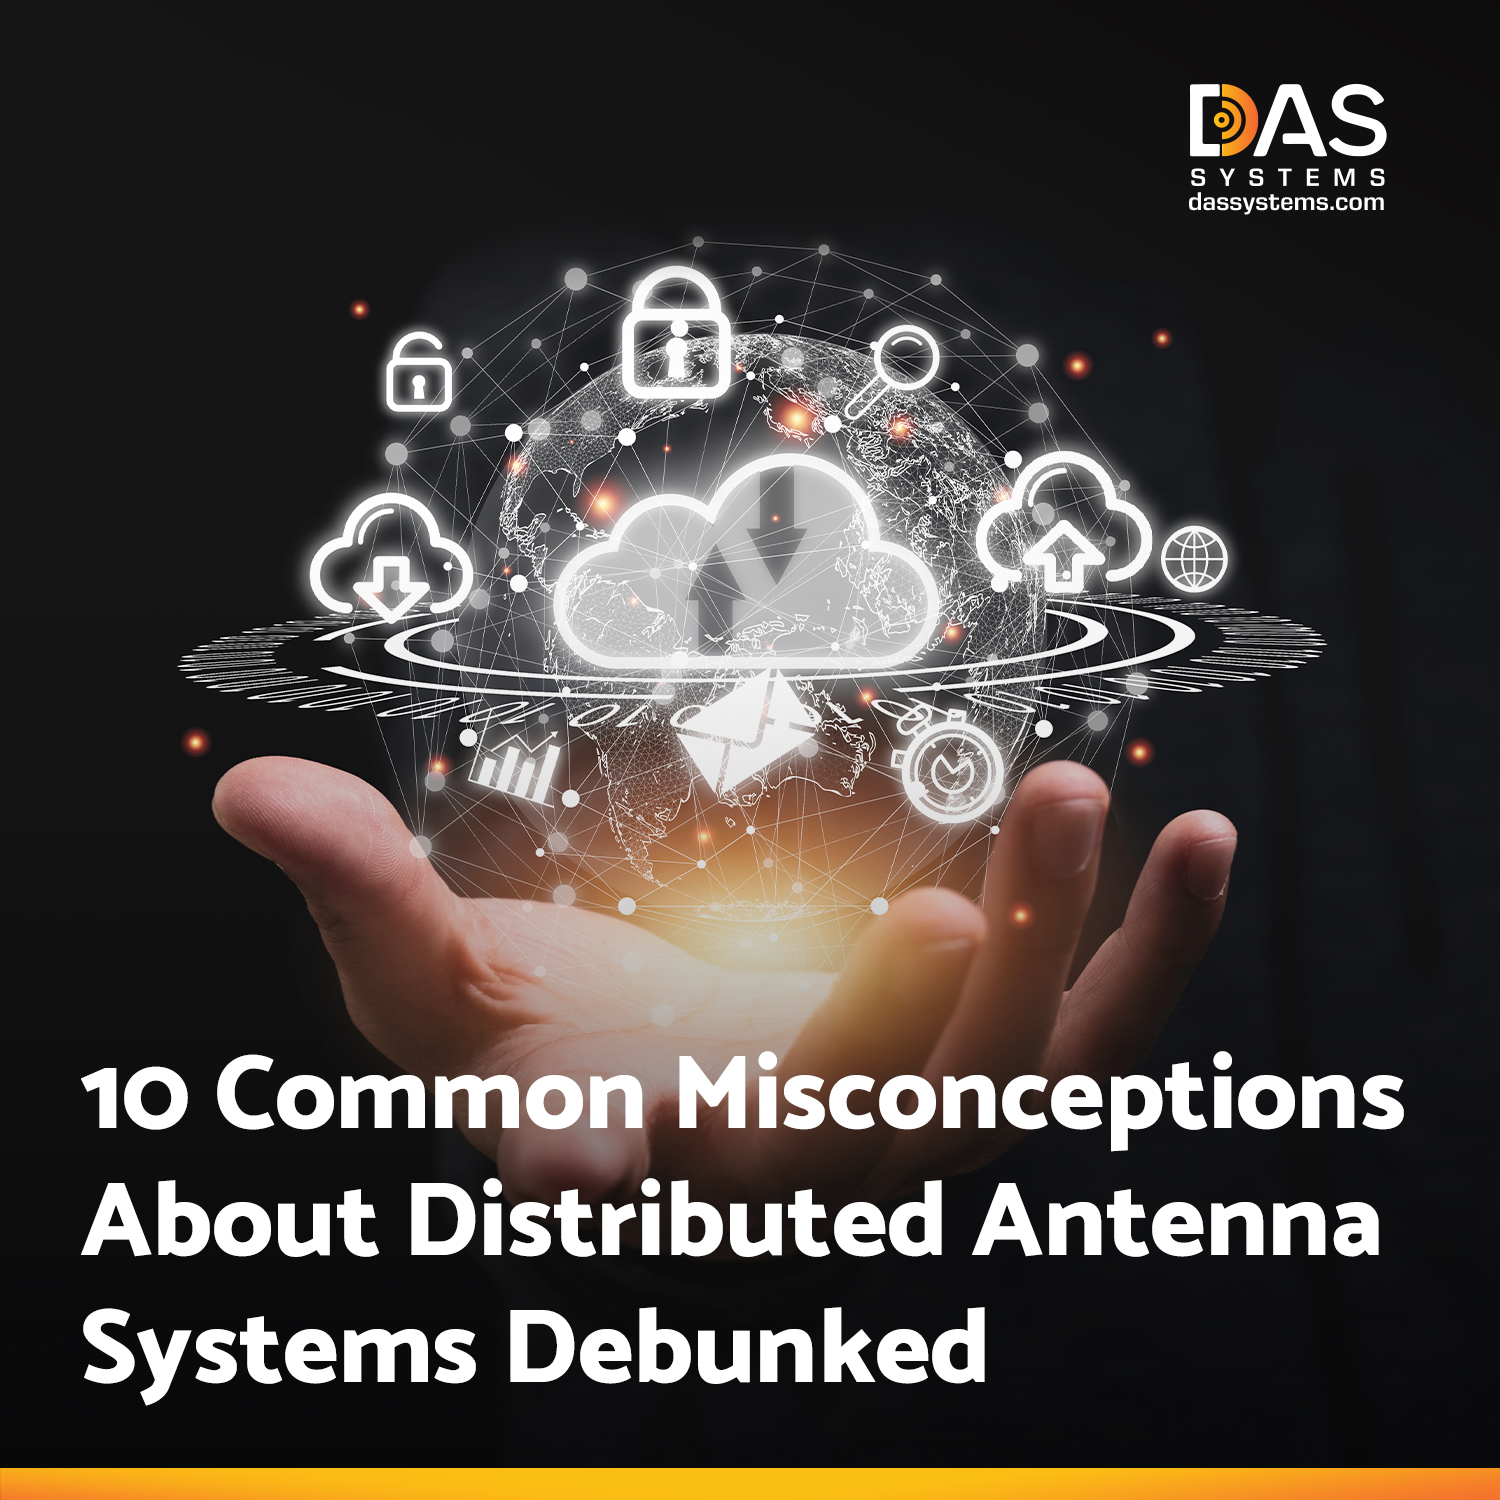 Uncover the truth behind common misconceptions about Distributed Antenna Systems (DAS). Contact us for a free consultation and optimize your wireless connectivity.